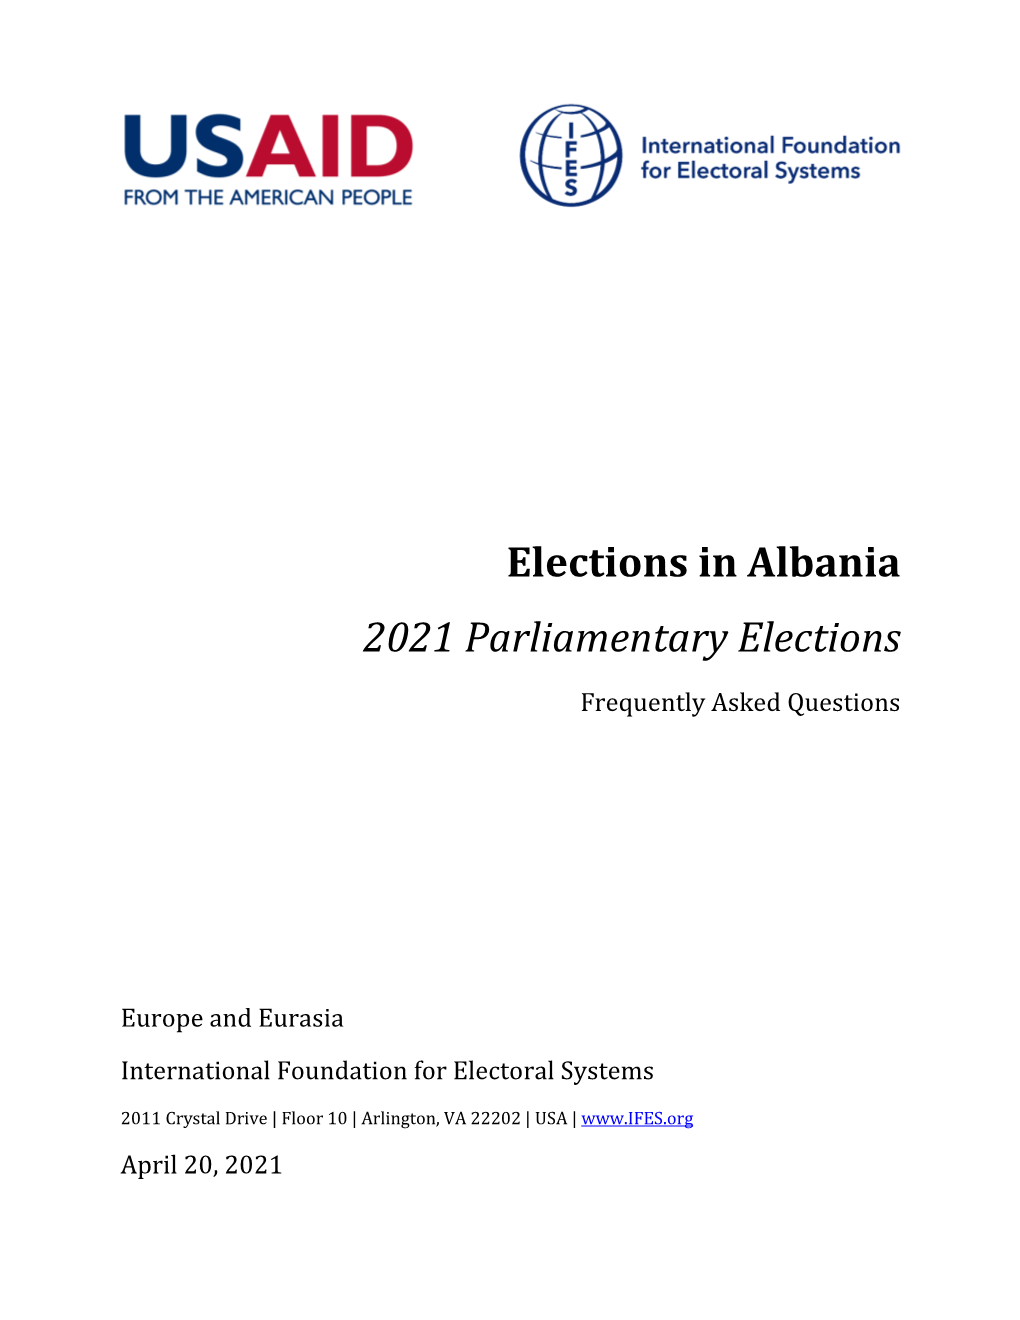 IFES Faqs Elections in Albania: 2021 Parliamentary Elections April 2021